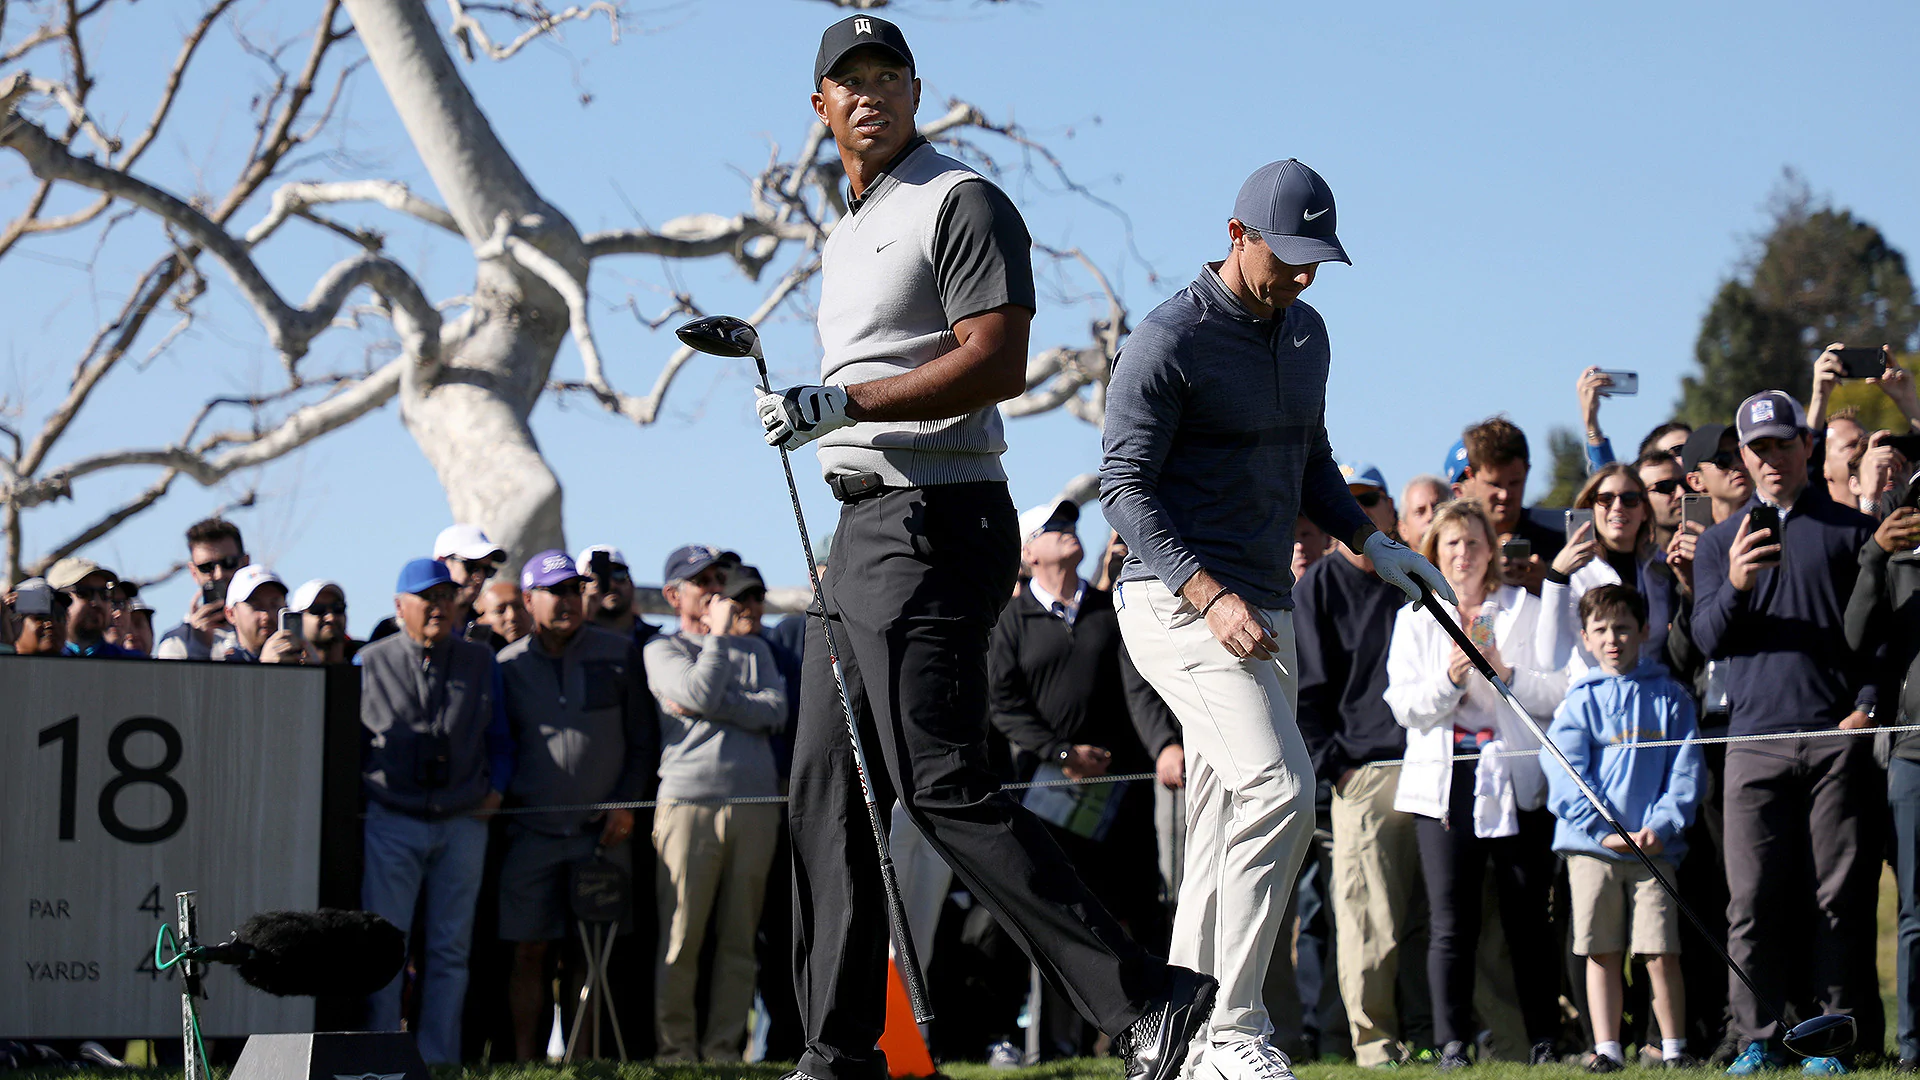 Watch: Tiger highlights from Day 1 at Riviera